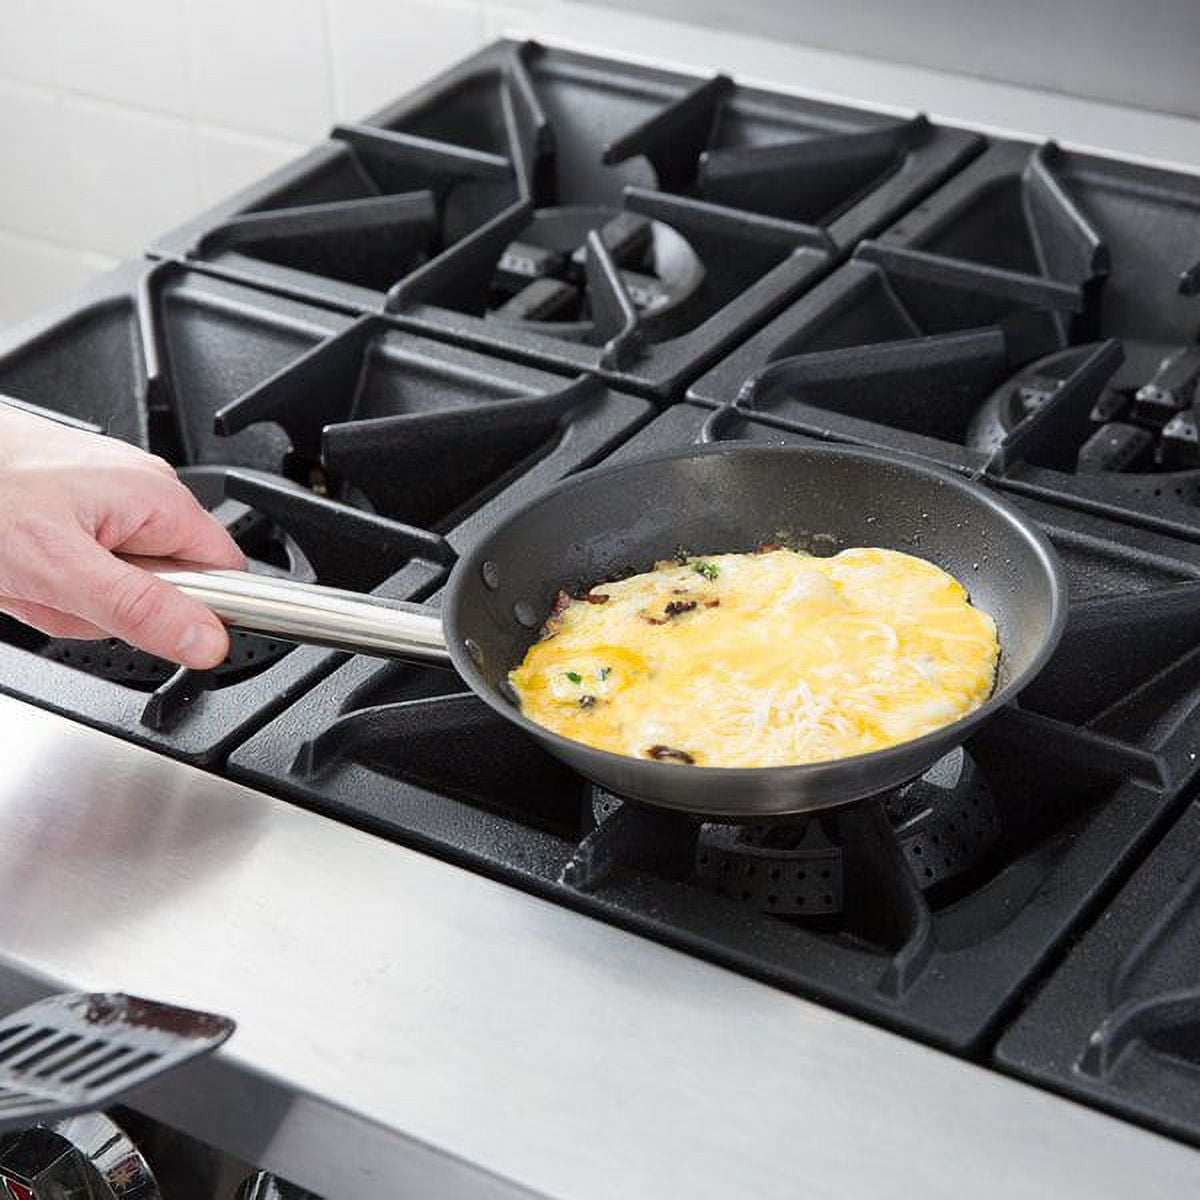 Vigor SS1 Series 8 1/2 Stainless Steel Fry Pan with Aluminum-Clad Bottom  and Dual Handles